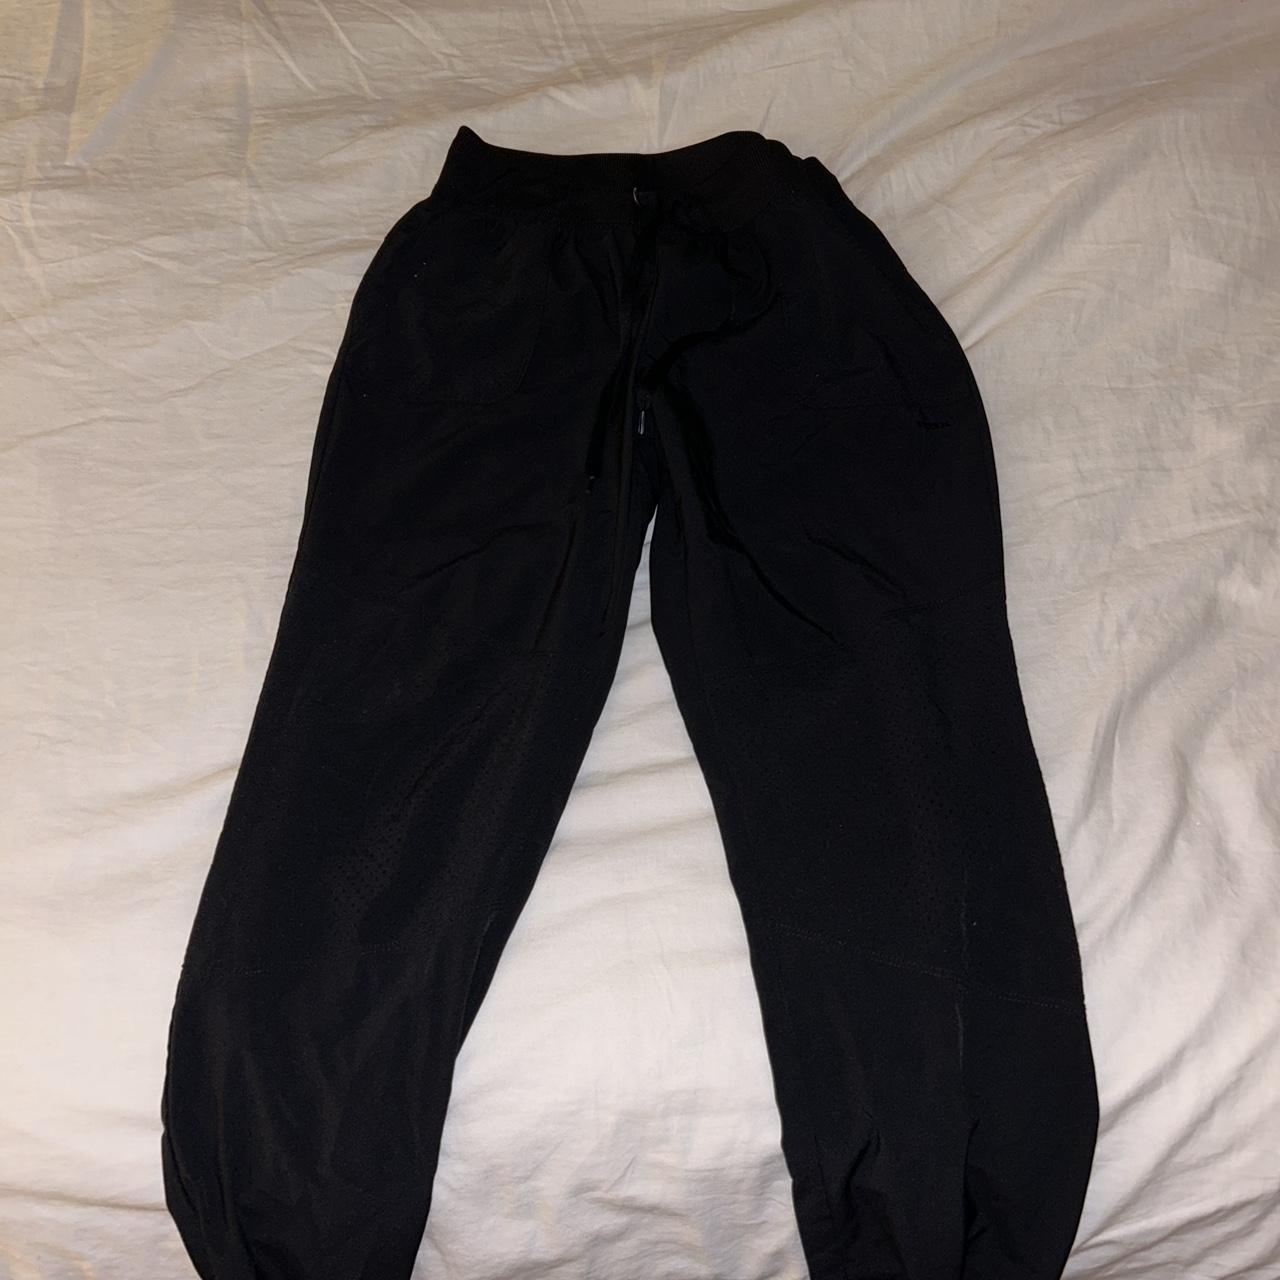 black RBX joggers! the knees have a mesh detailing! - Depop